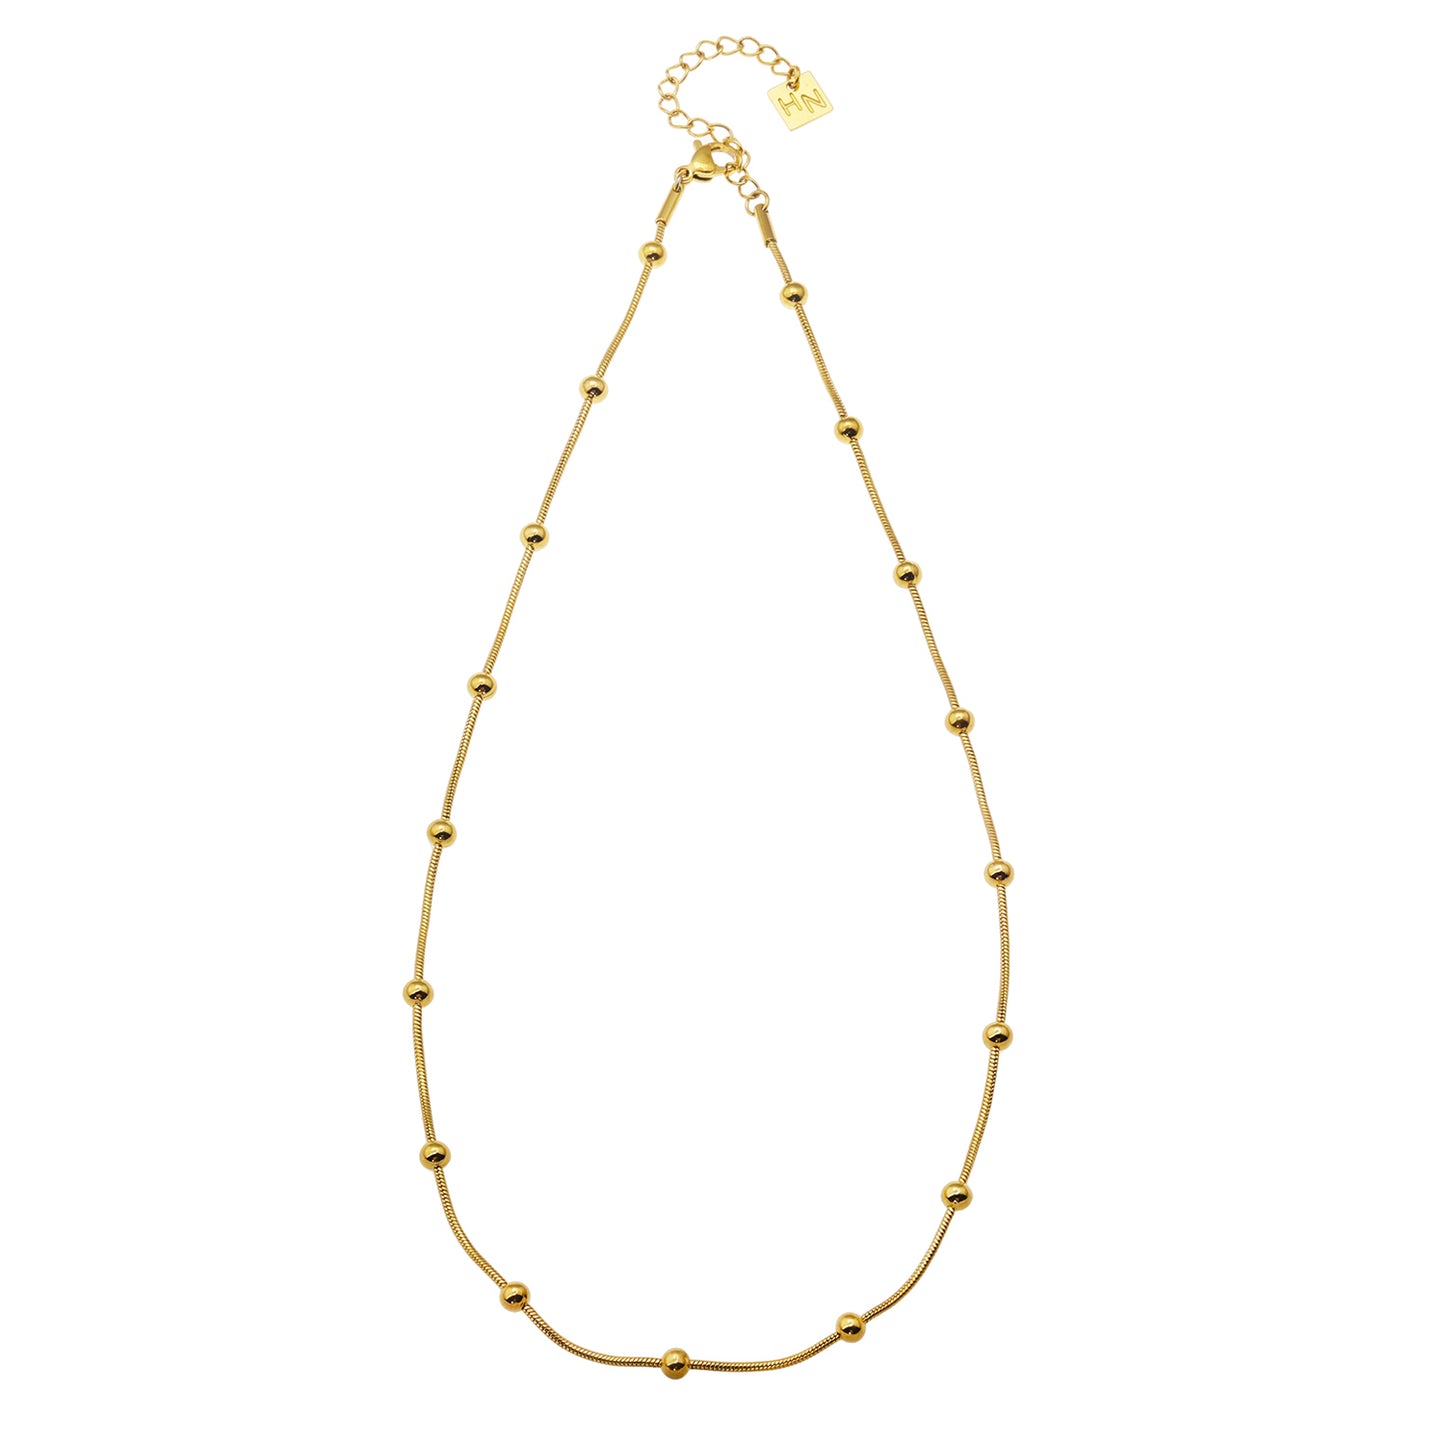 hackneynine | hackney-nine Style MAKARIA 10095: Snake-Skin Textured Chain Necklace with Ball Shaped Beads